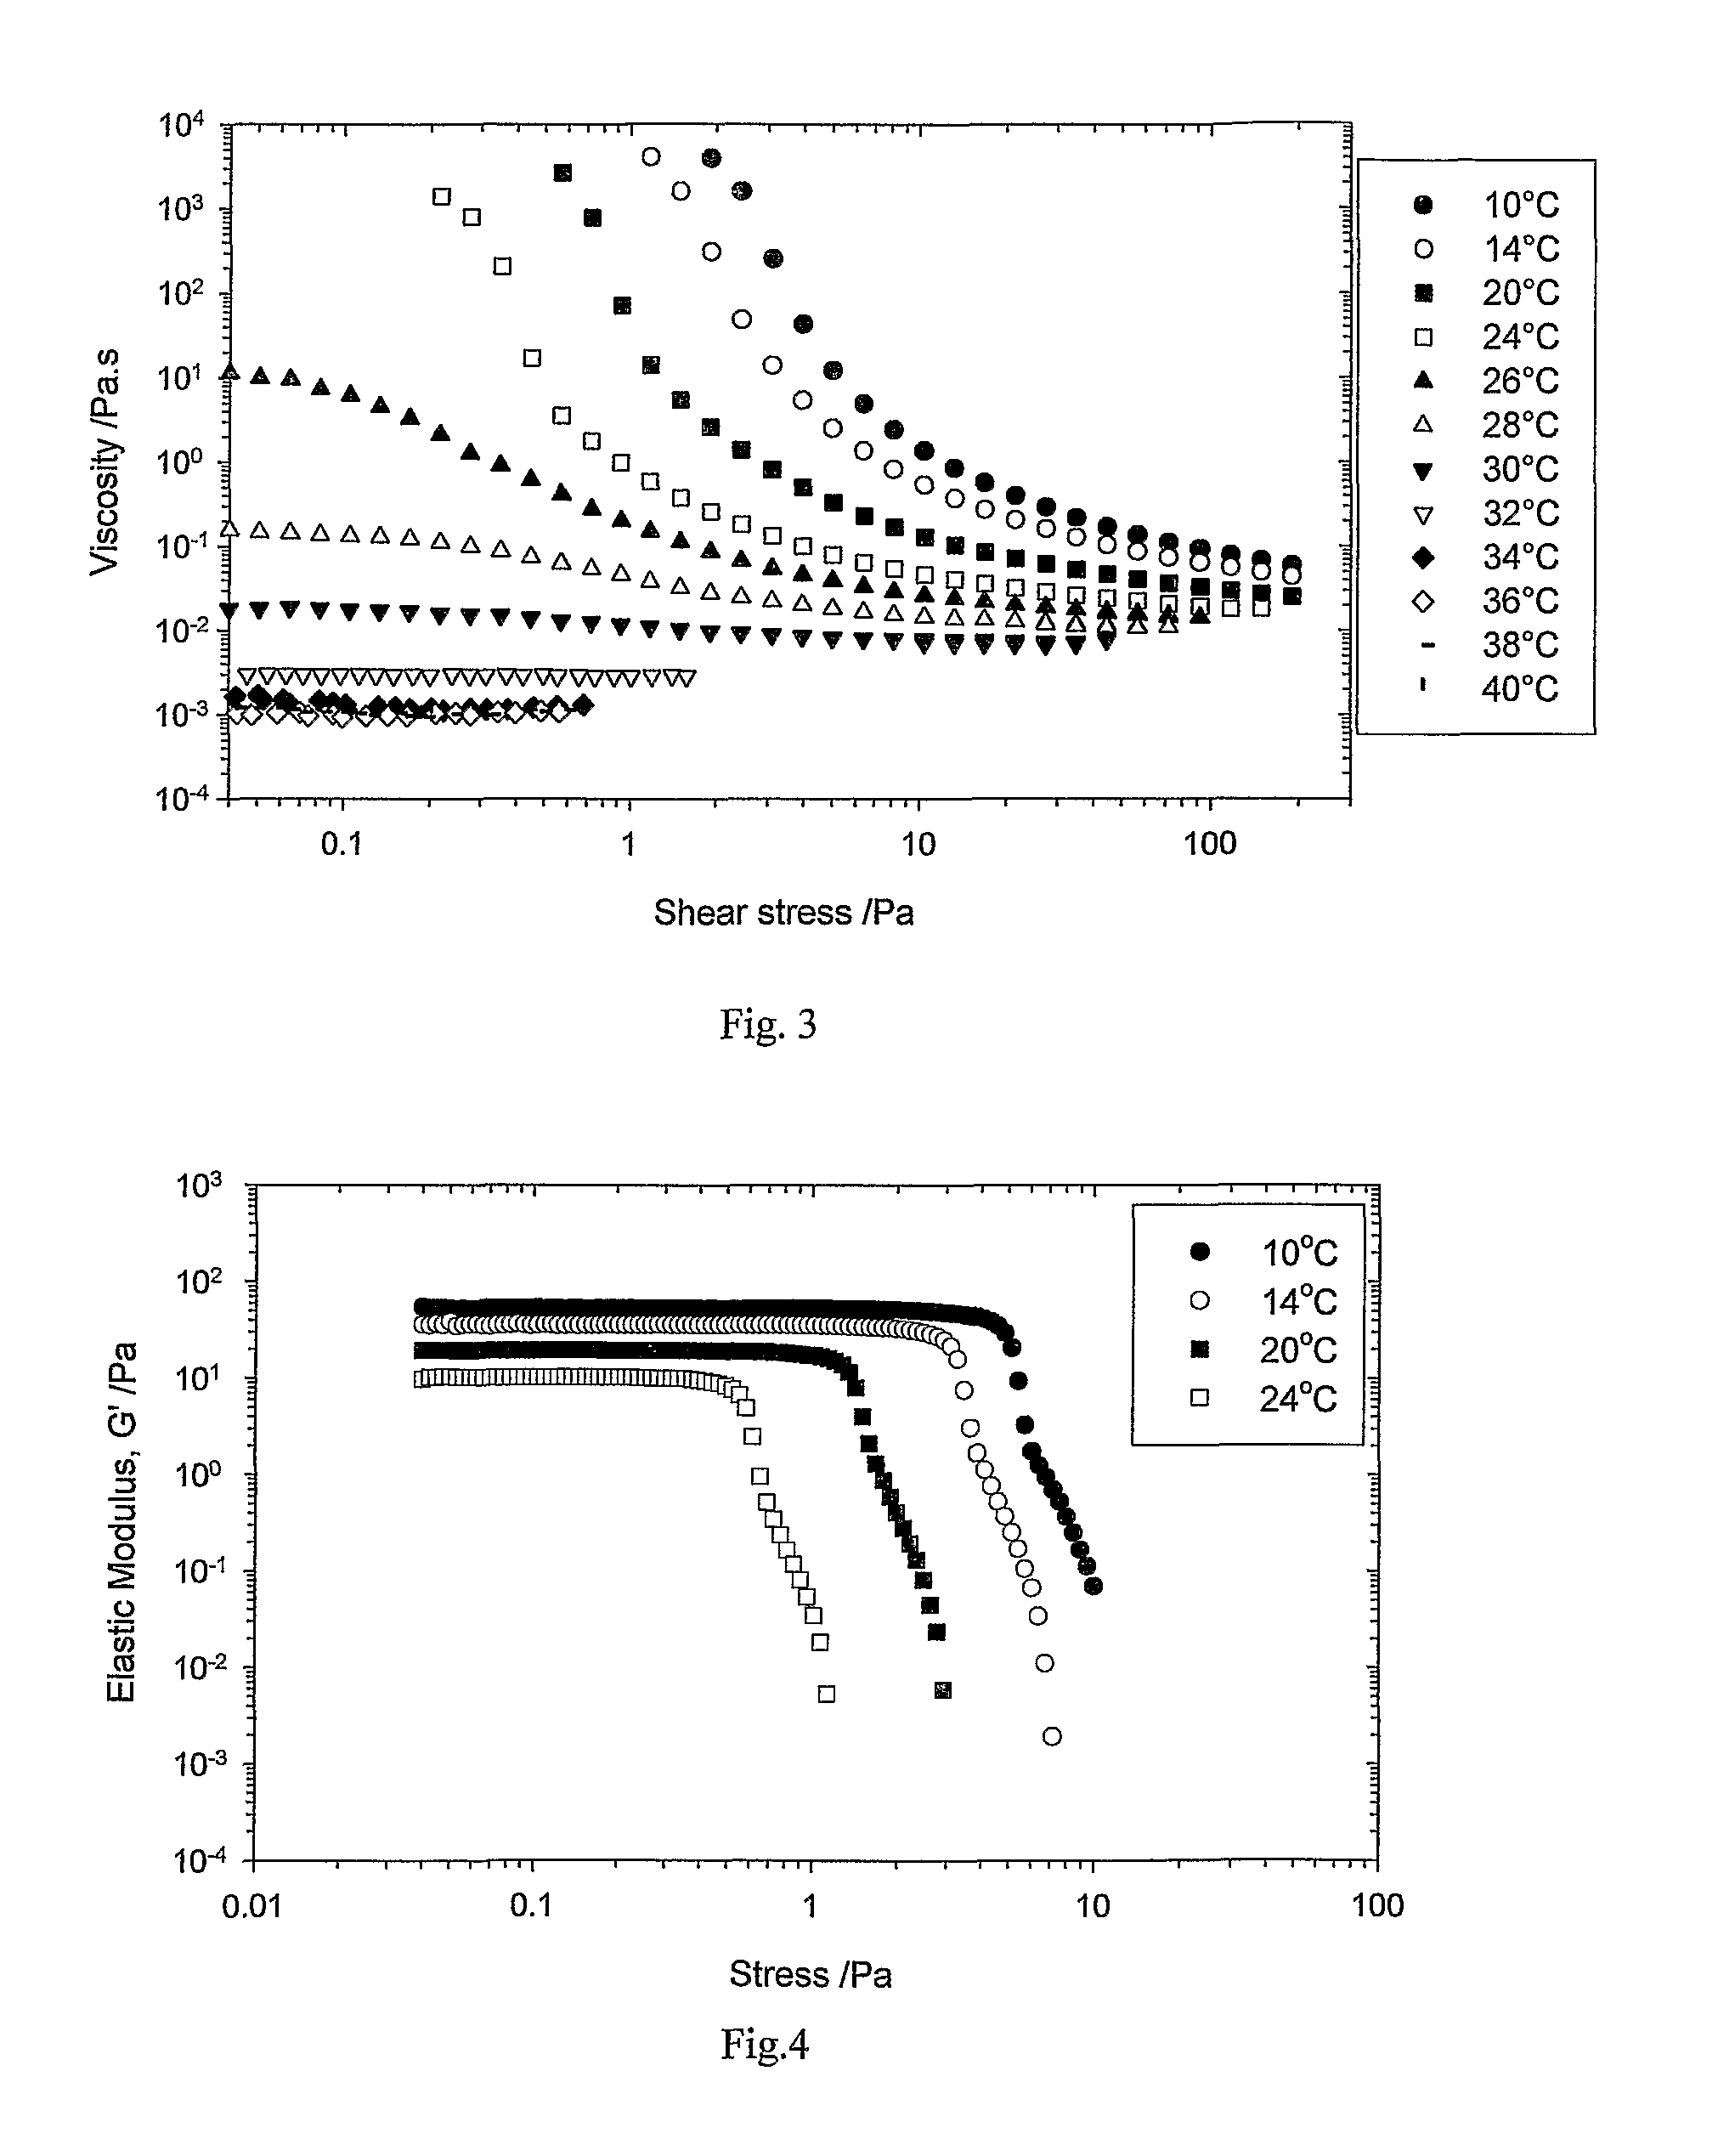 Ink for printing on low energy substrates